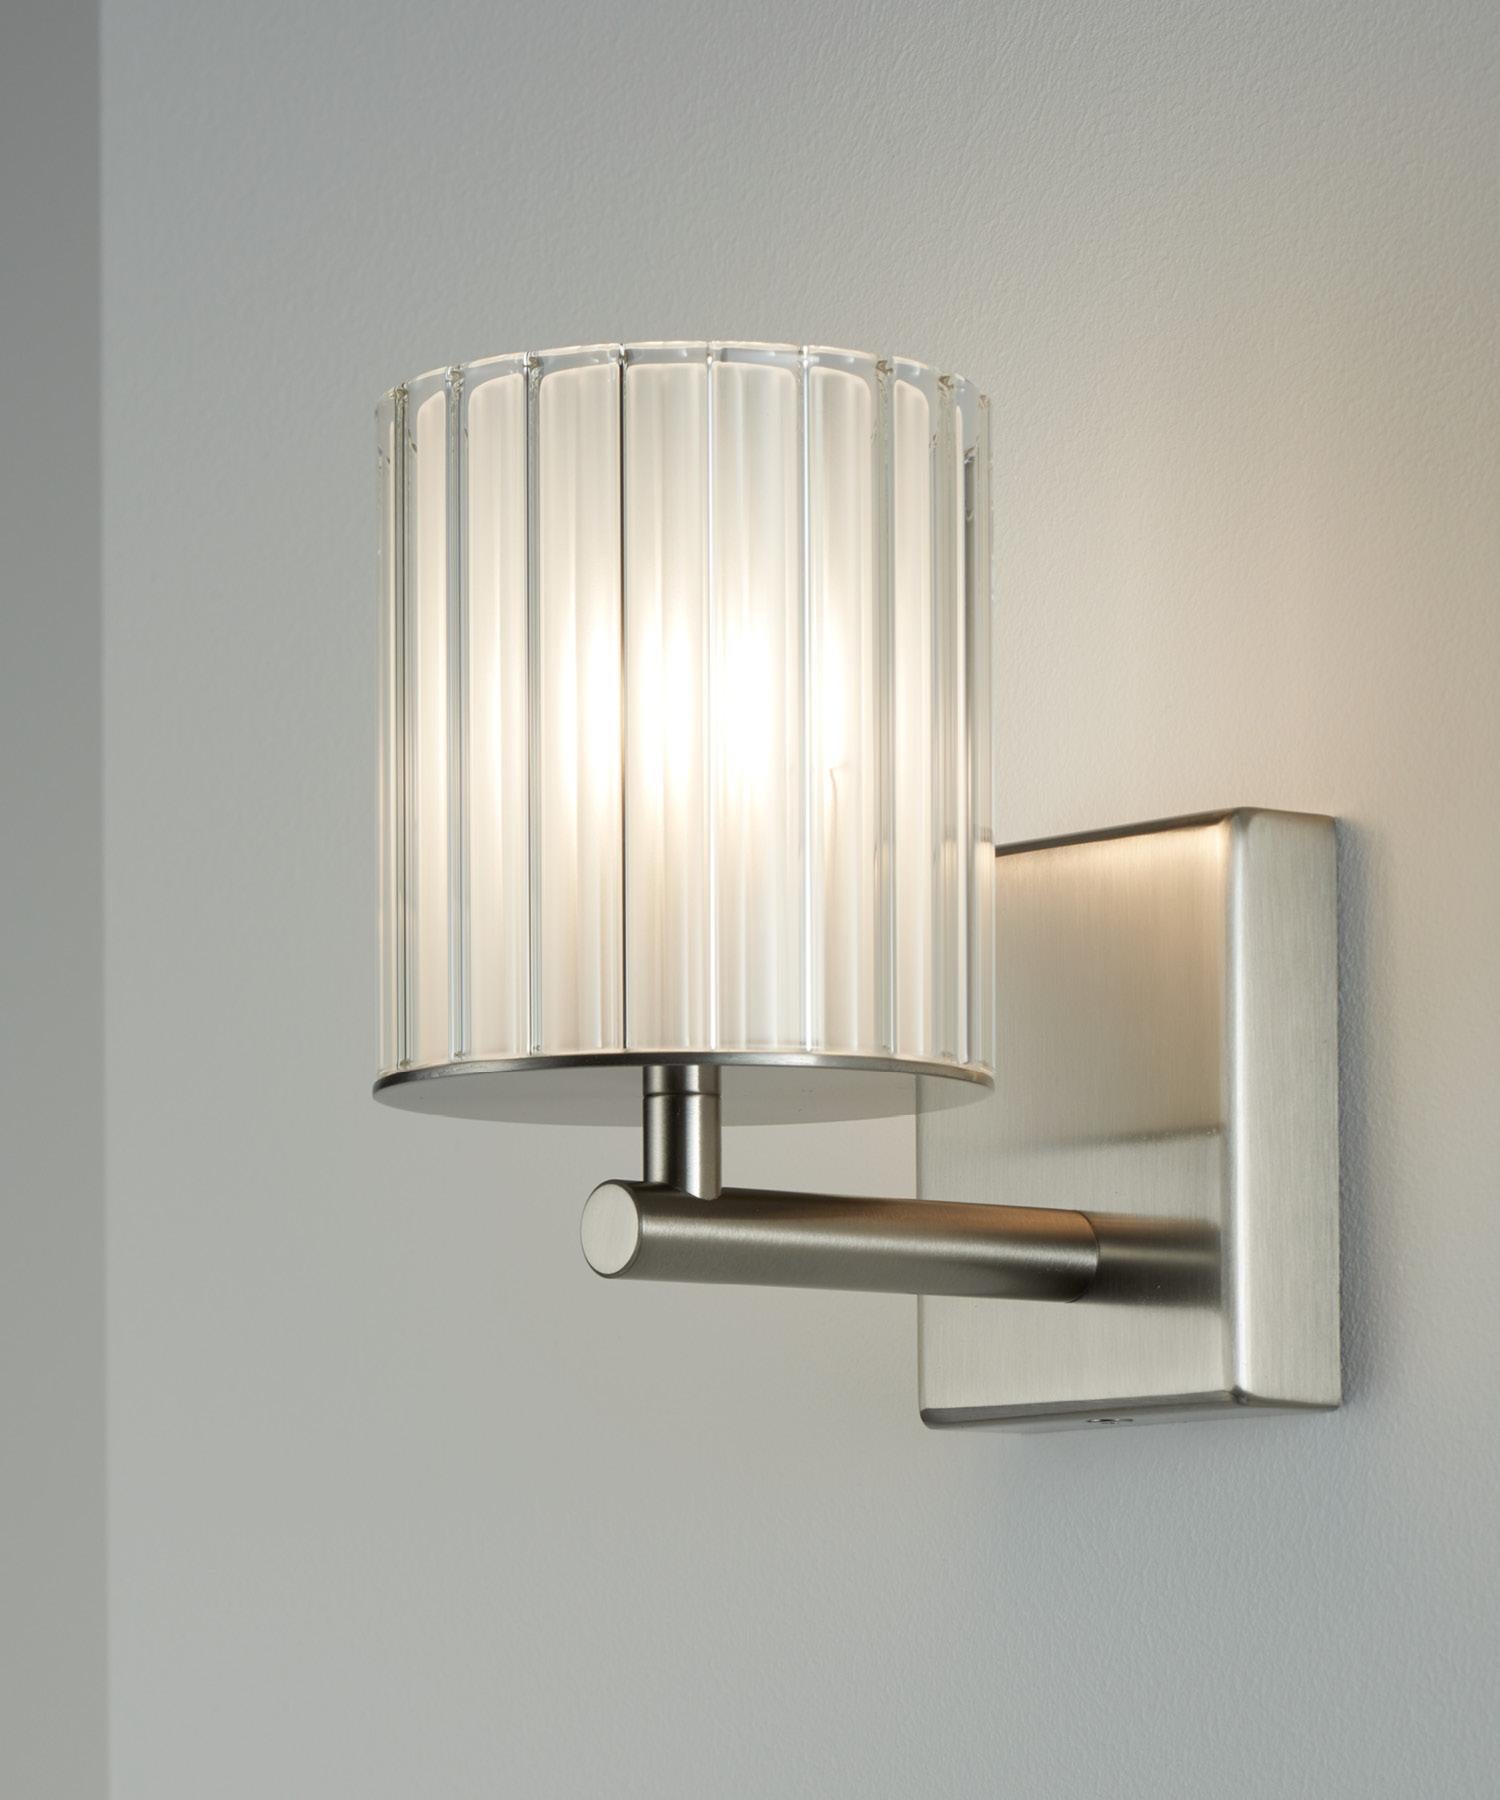 Metalwork Flute Wall Light in Polished Chrome with Frosted Glass Diffuser, UL Listed For Sale